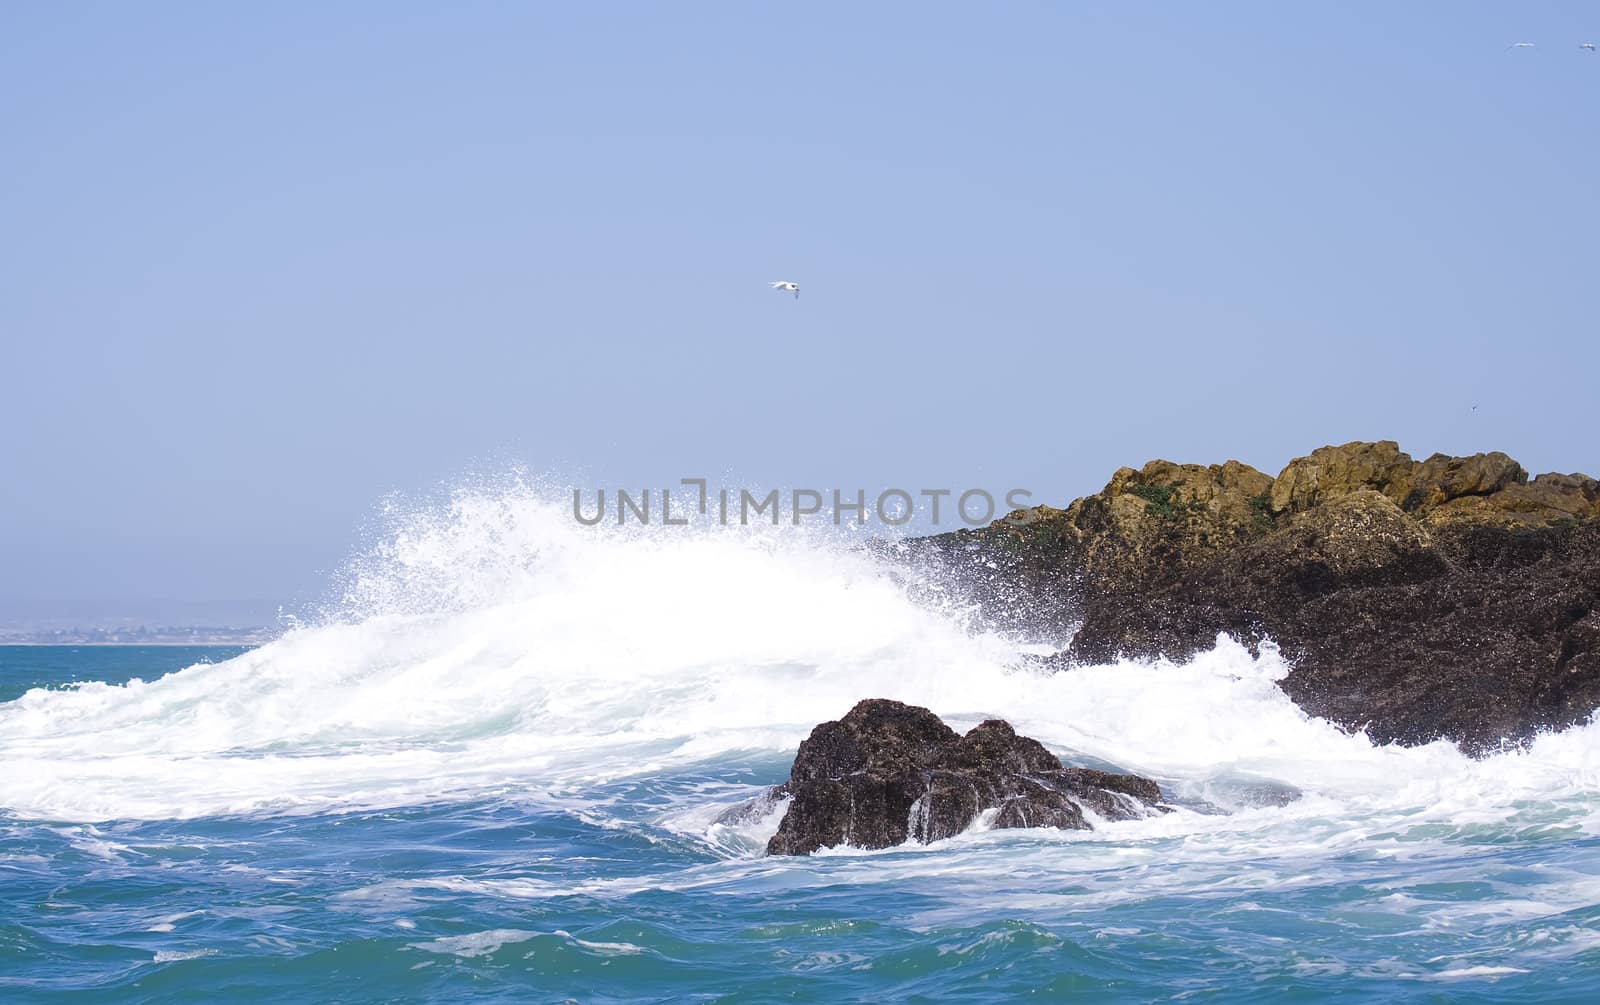 Powerful wave crashing up against the rocks in the middle of the ocean